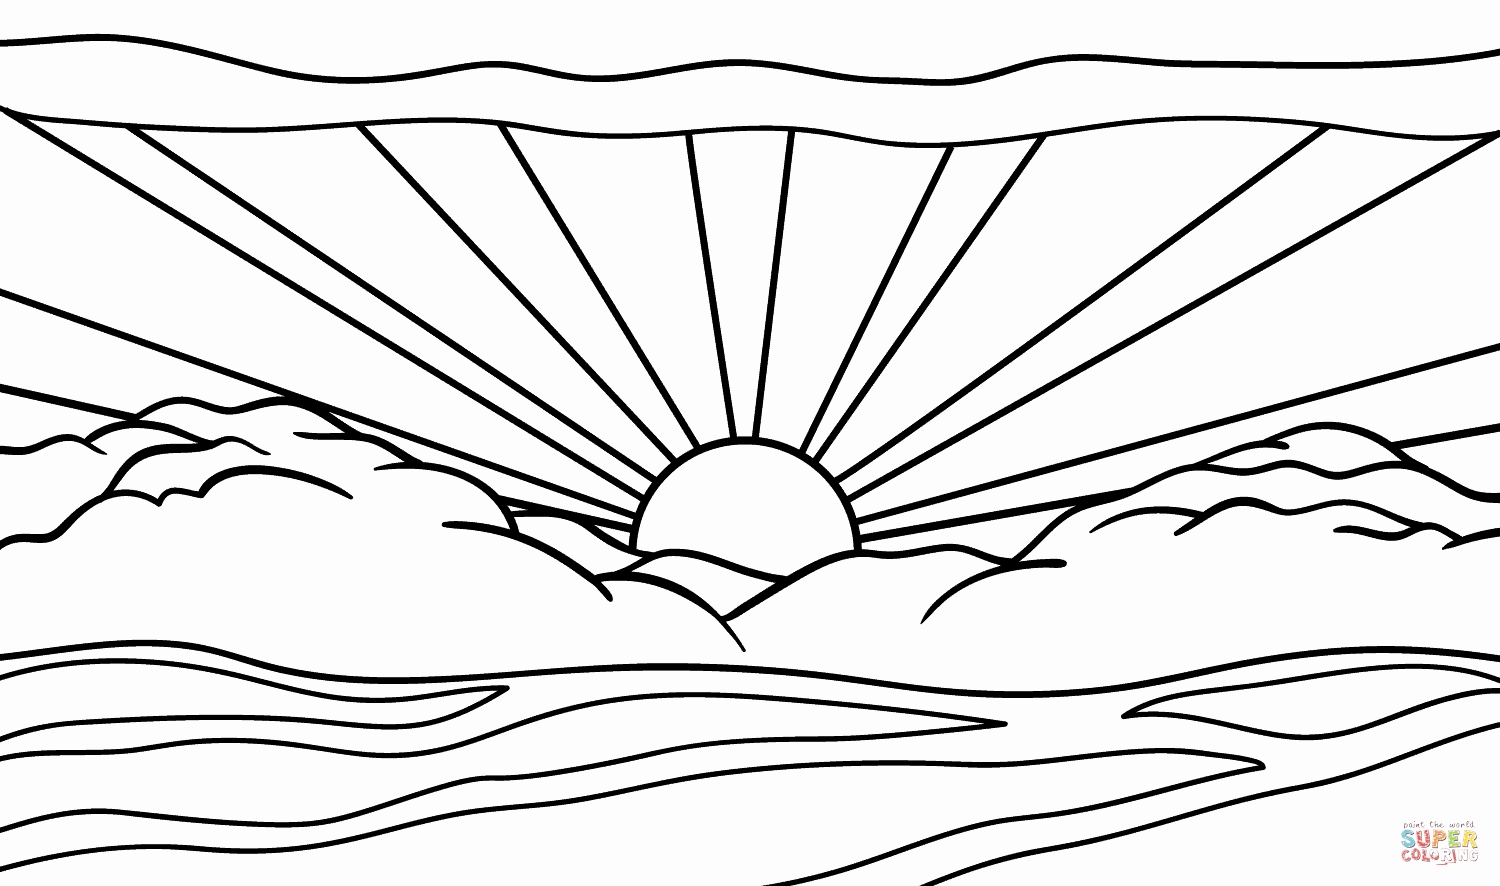 Sunrise Coloring Page at GetDrawings.com | Free for personal ...